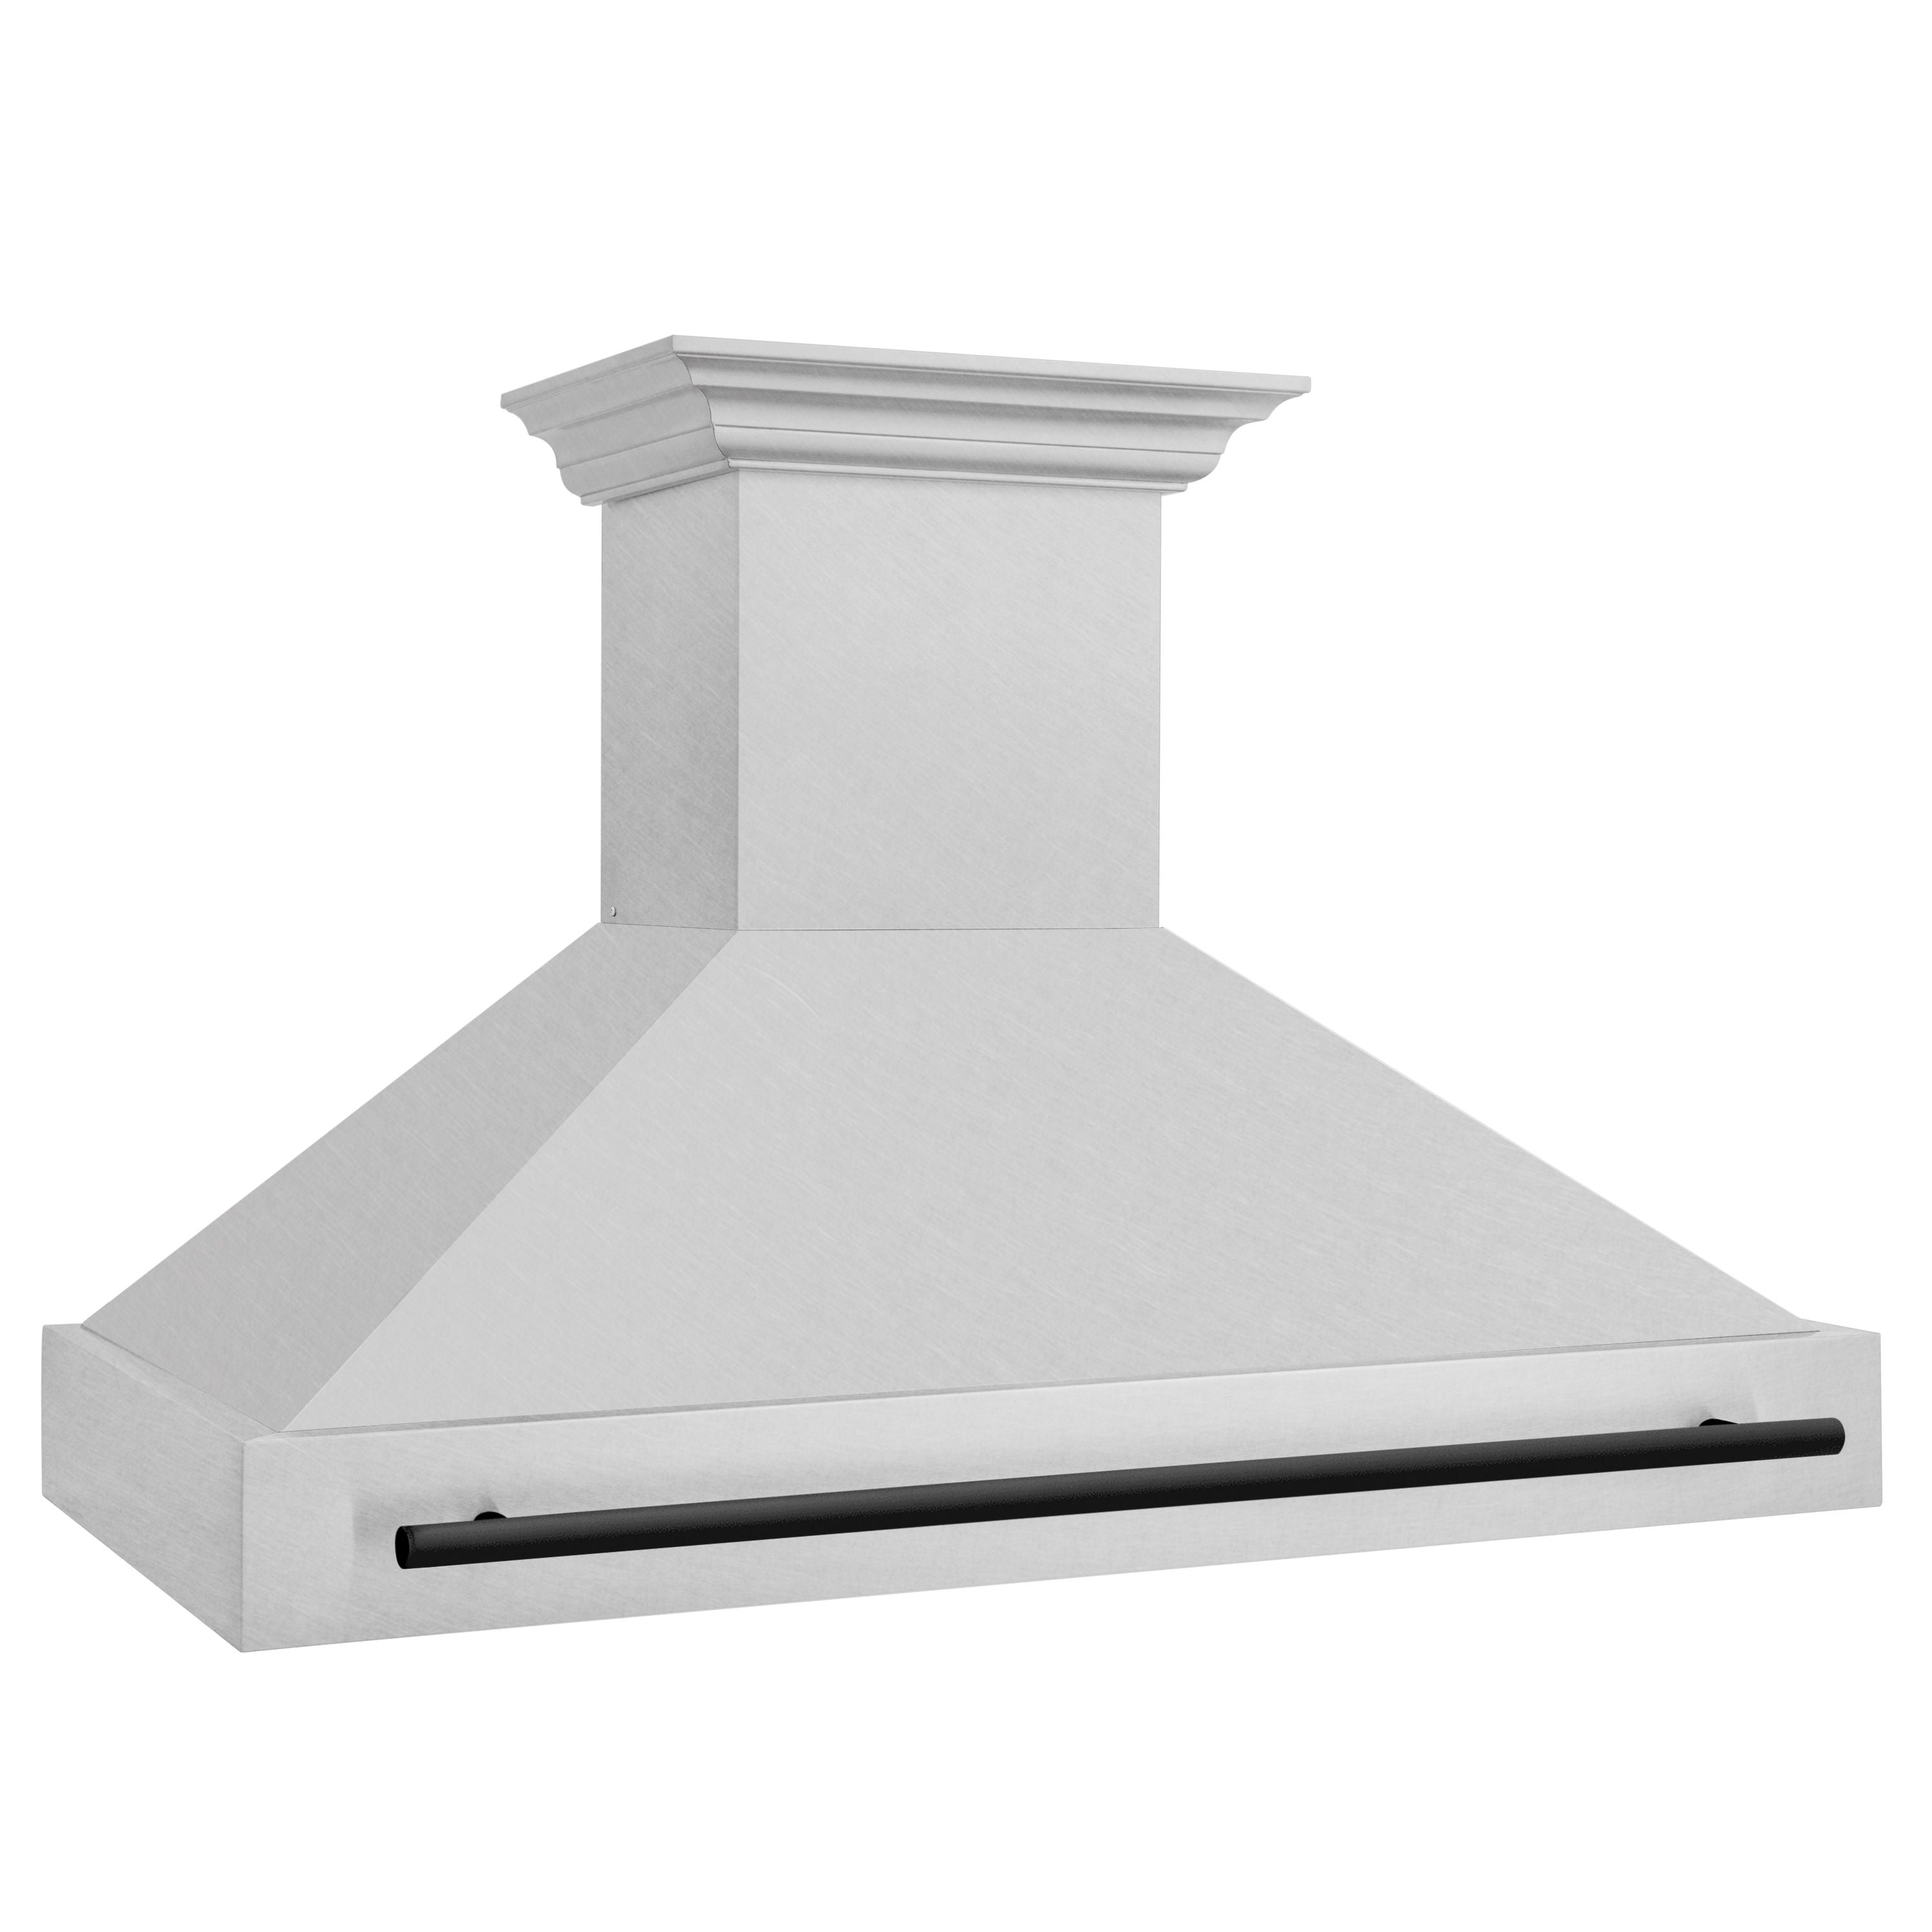 ZLINE Autograph 48 Inch DuraSnow® Stainless Steel Range Hood with DuraSnow® Shell and Matte Black Handle, 8654SNZ-48-MB